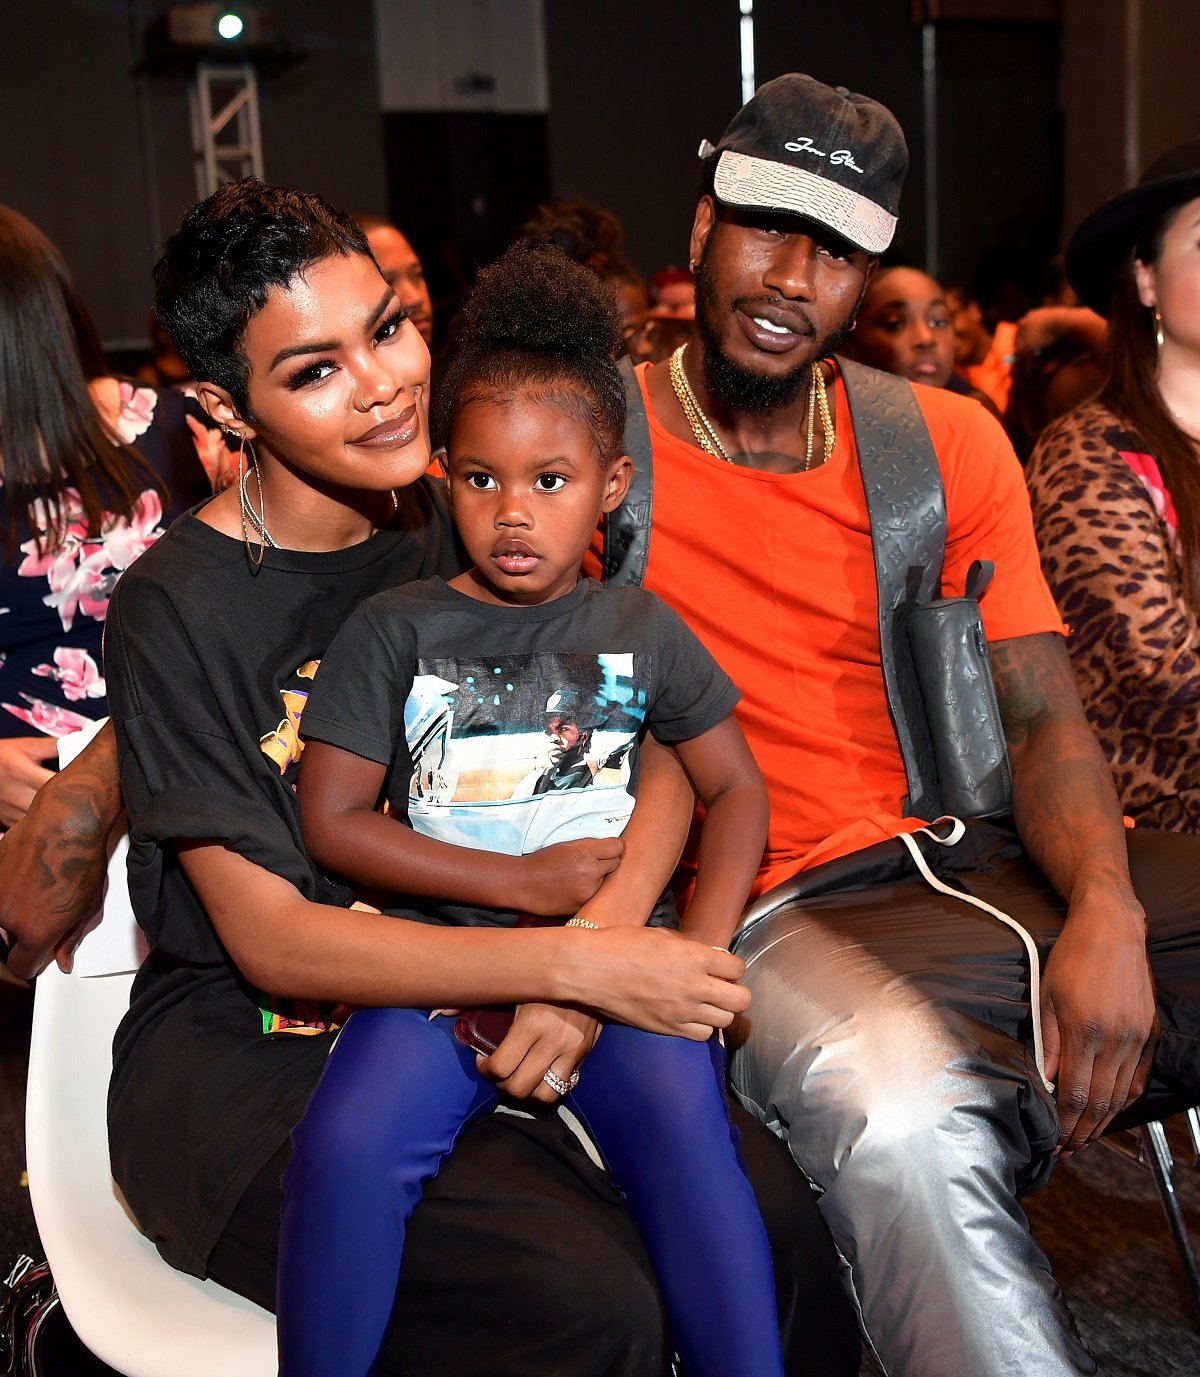 Iman Shumpert and Teyana Taylor holding their daughter, Iman Tayla Shumpert Jr., at 'You Be There' screening